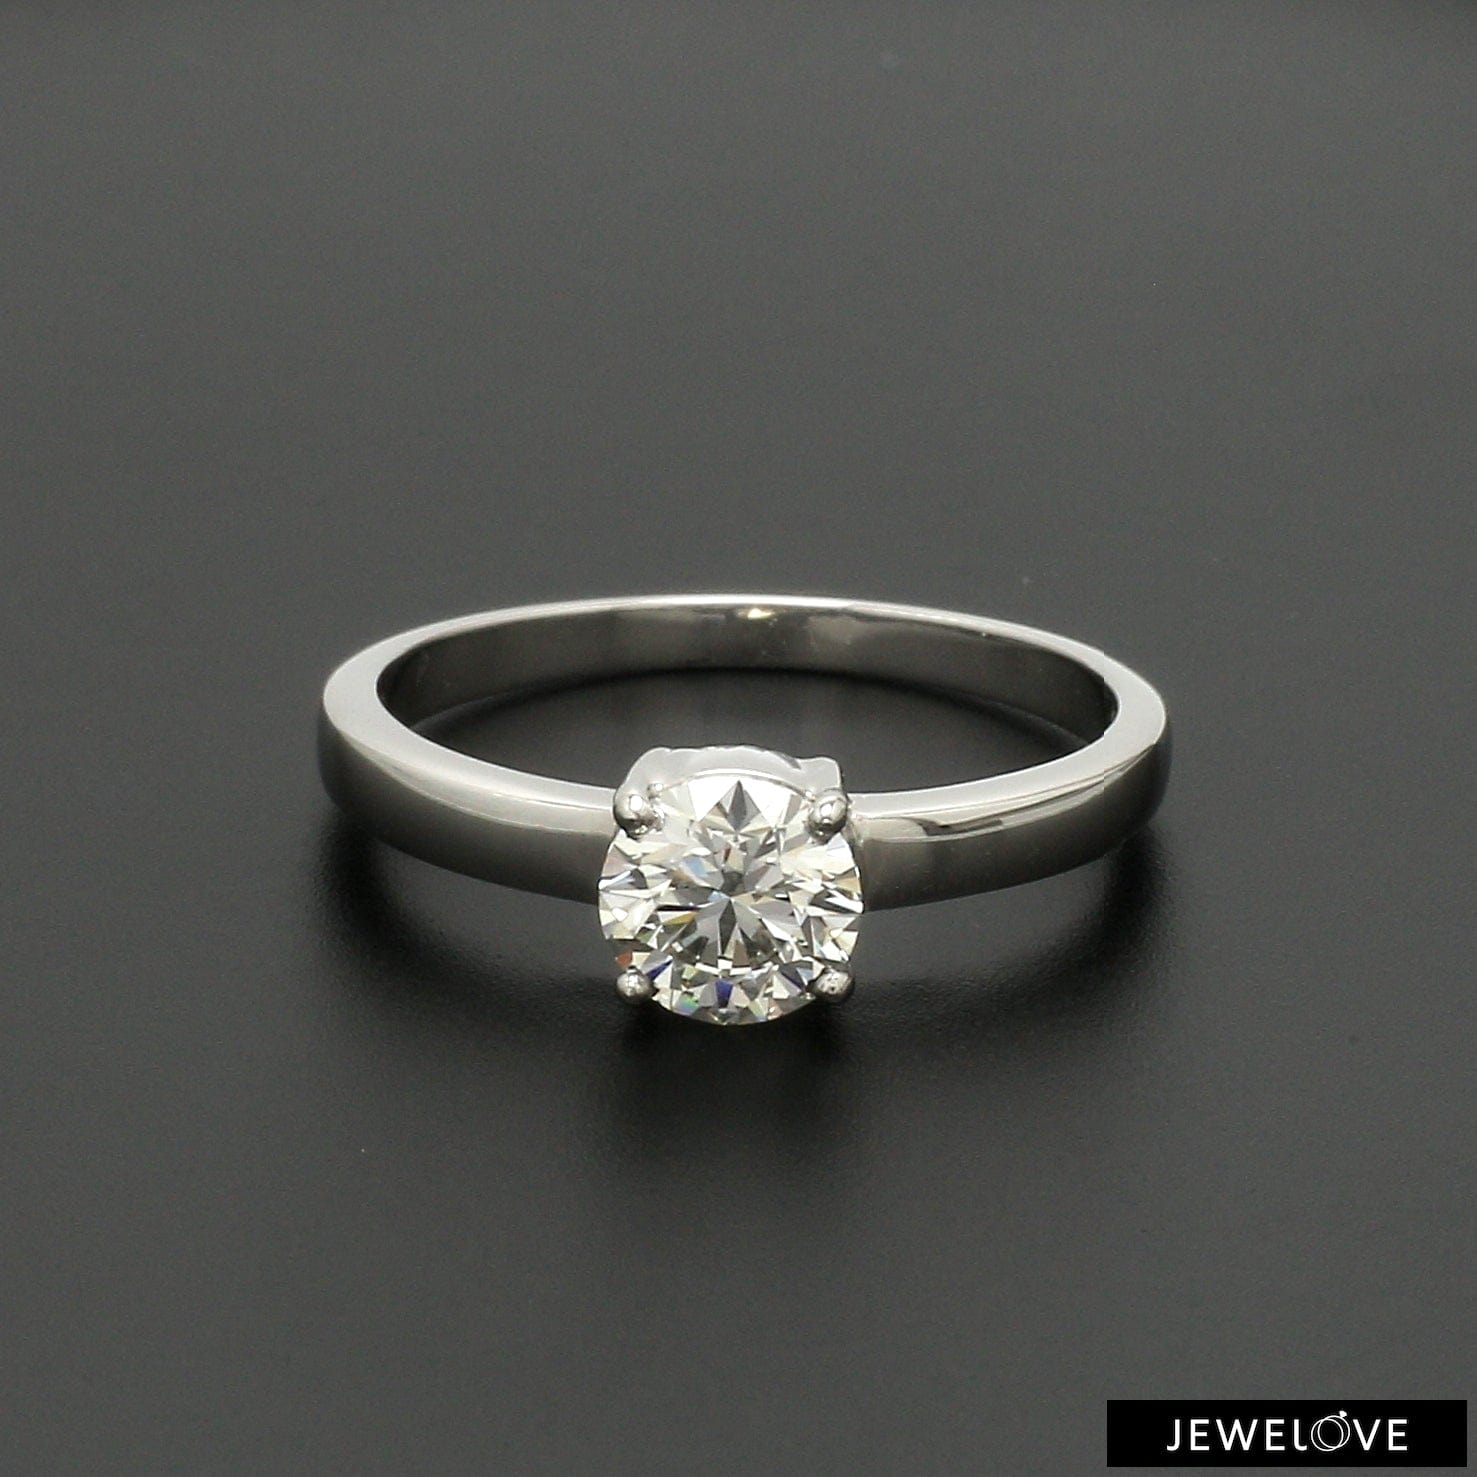 Engagement Rings - Solitaire Diamond Rings For Engagement/Wedding